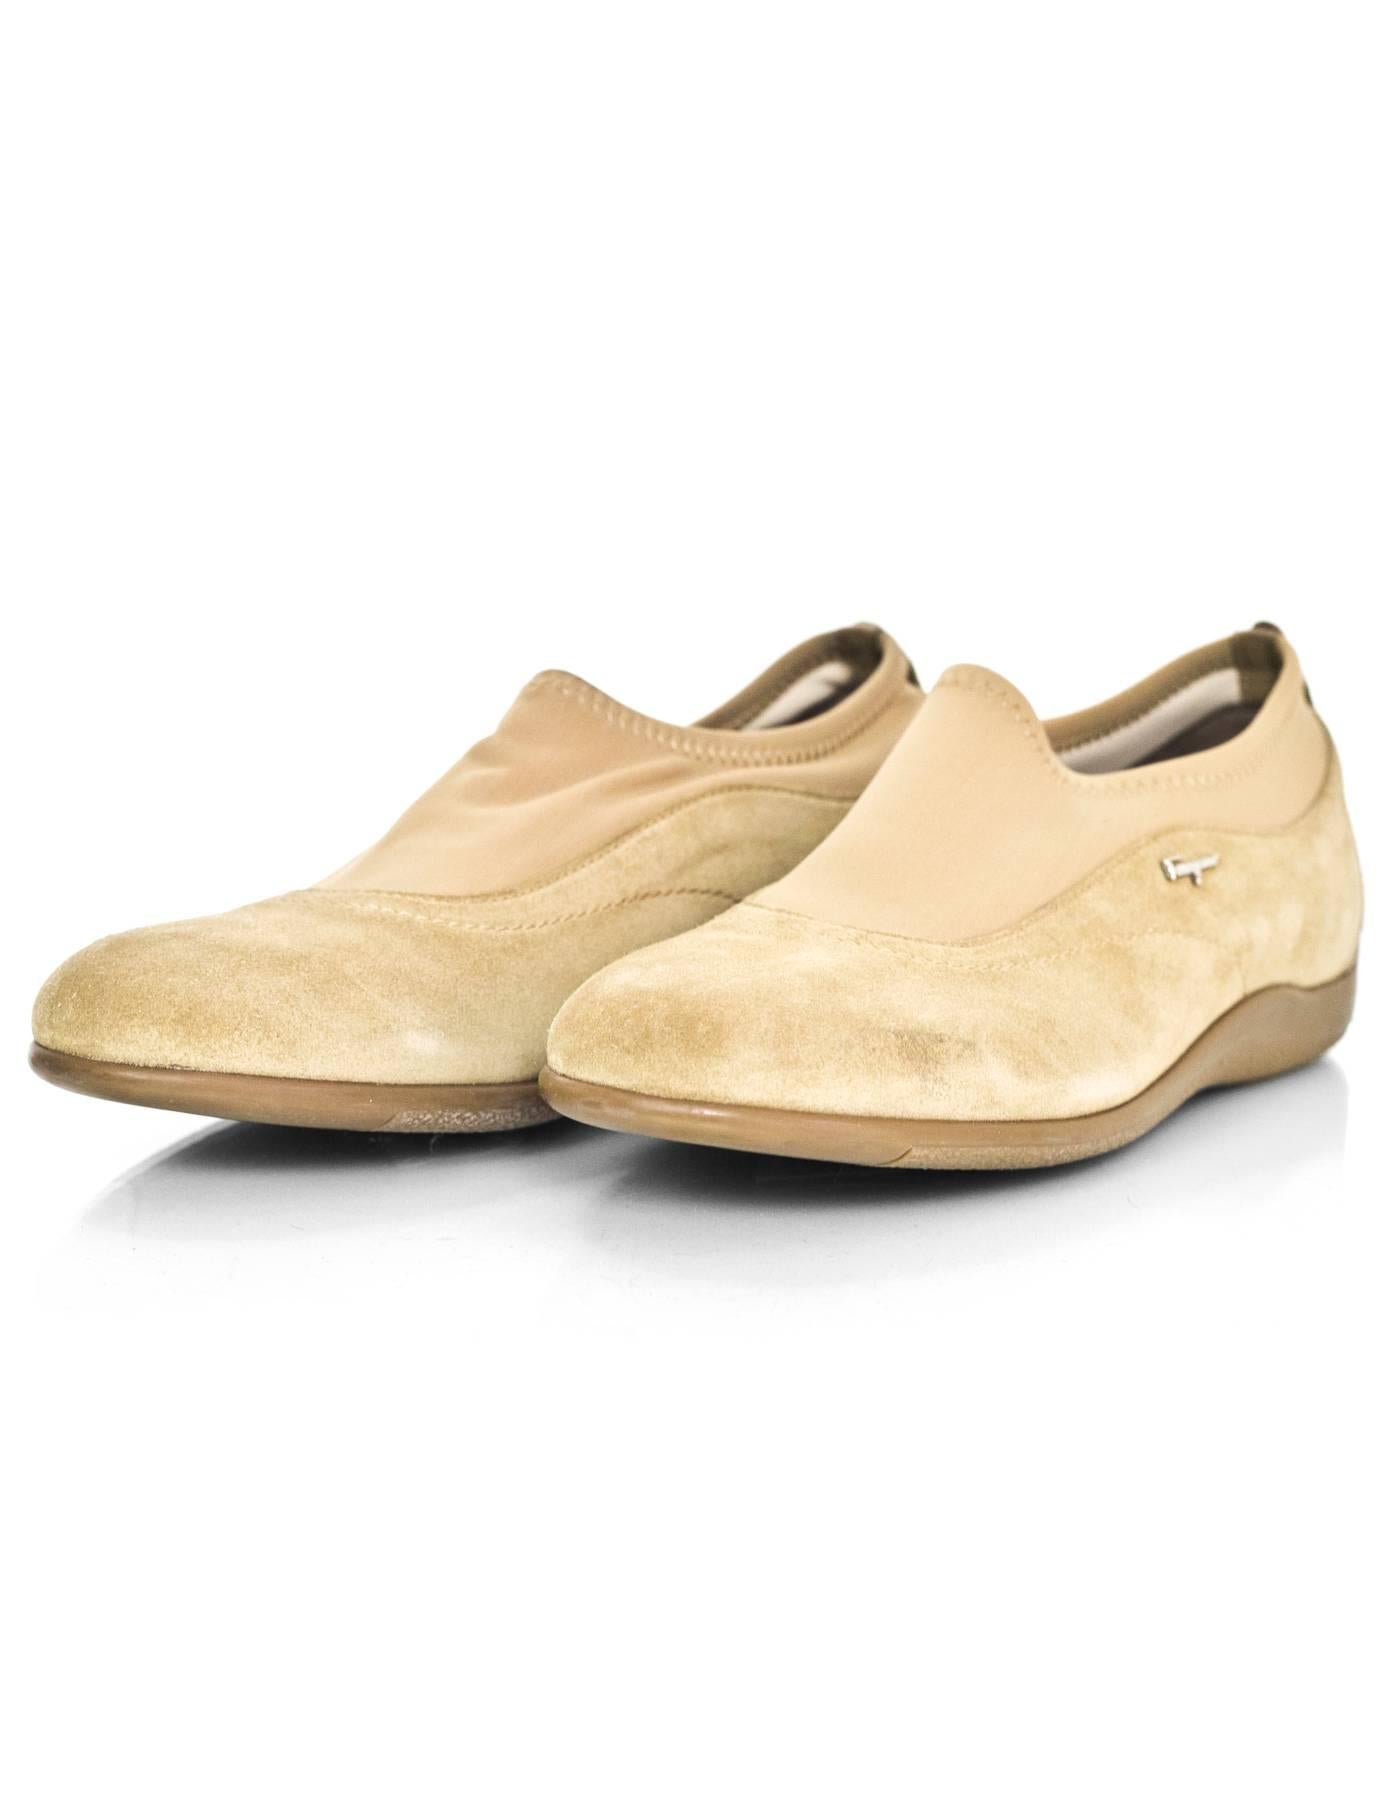 Salvatore Ferragamo Tan Suede Shoes Sz 37

Made In: Italy
Color: Tan
Materials: Suede
Closure/Opening: Slide on with stretch elastic foot opening
Sole Stamp: Salvatore Ferragamo Sport Made in Italy
Overall Condition: Excellent pre-owned condition